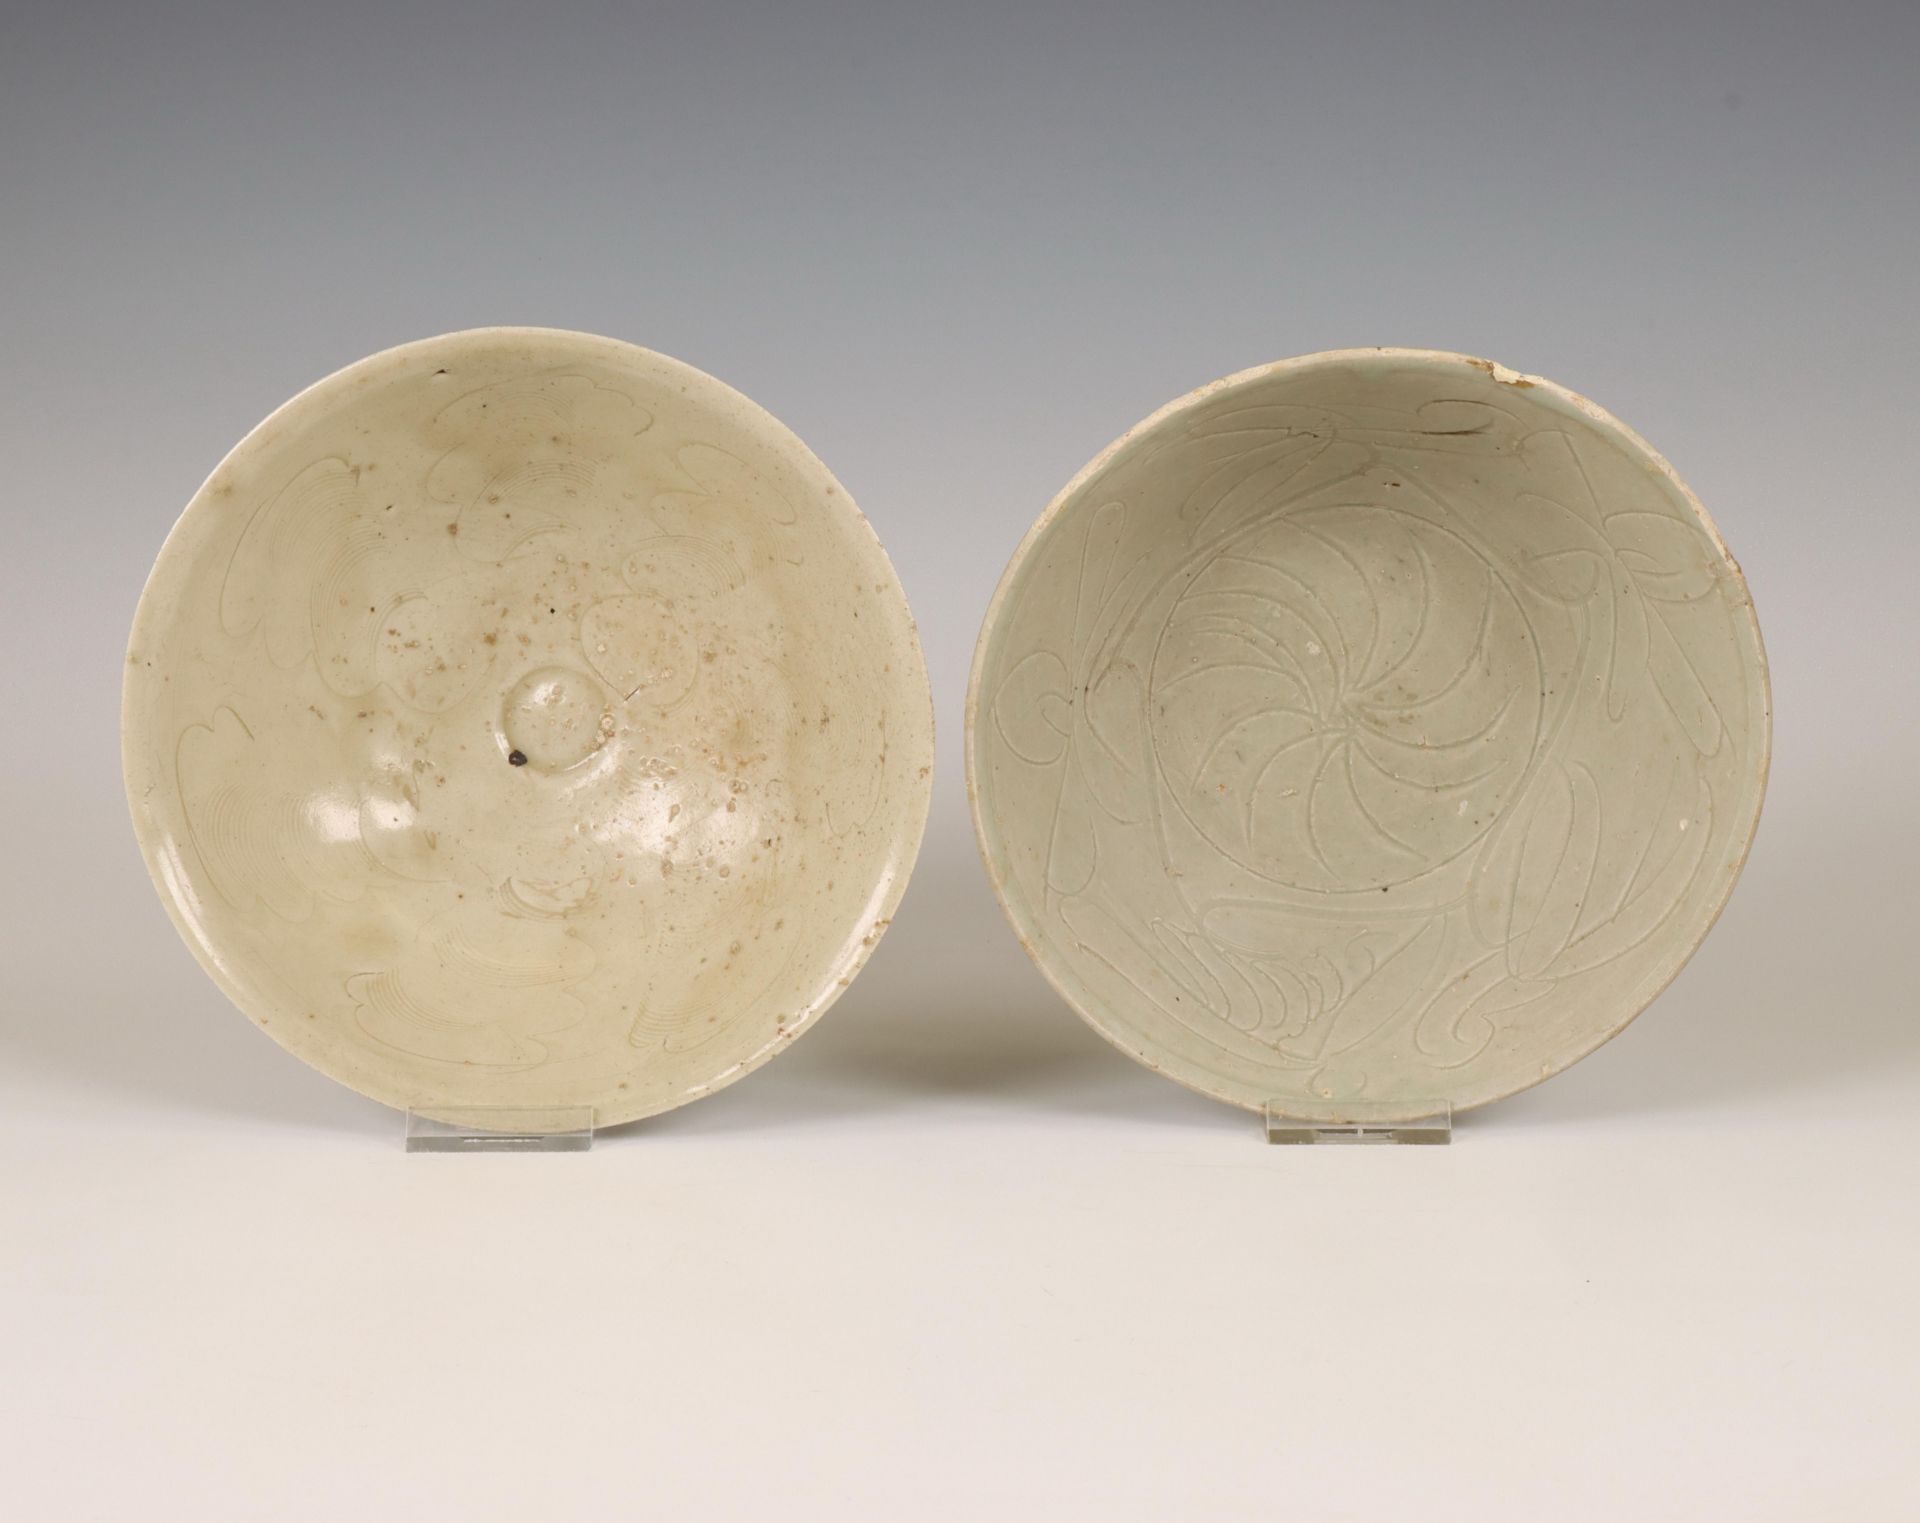 China, two celadon-glazed bowls, Song dynasty (960-1279) or later, - Image 3 of 3